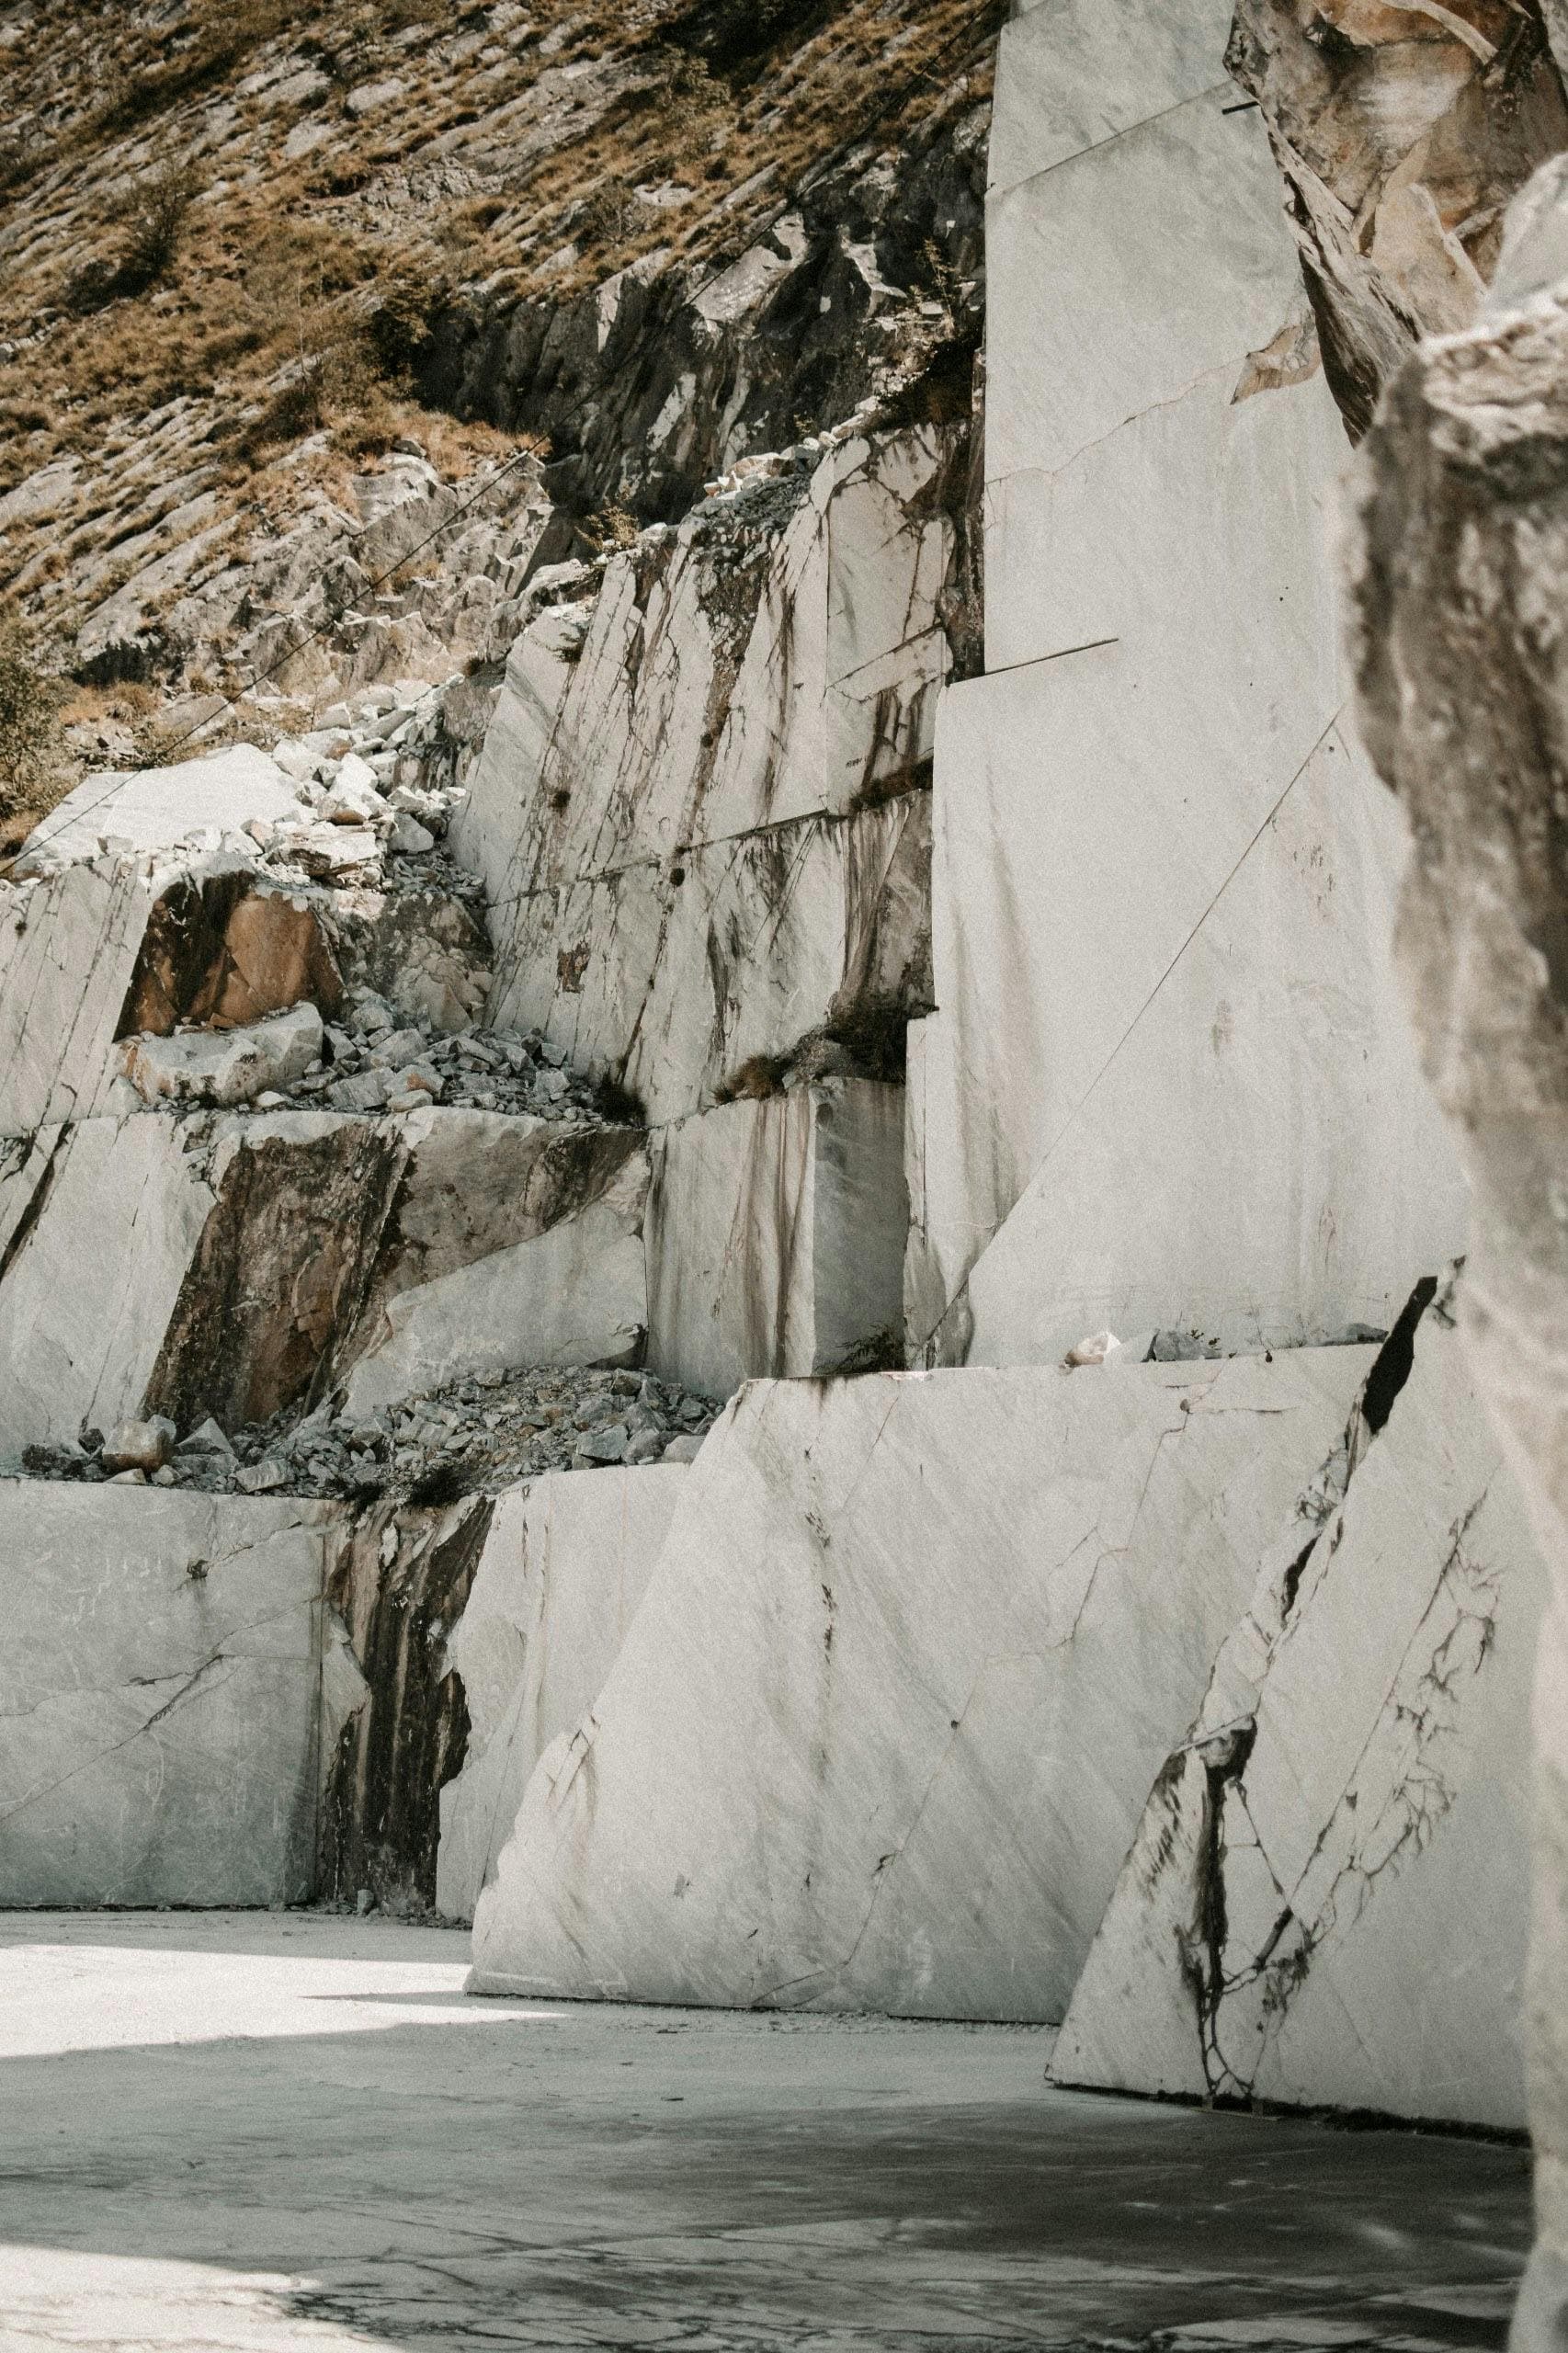 - Introducing the Top 10 Marble Mines